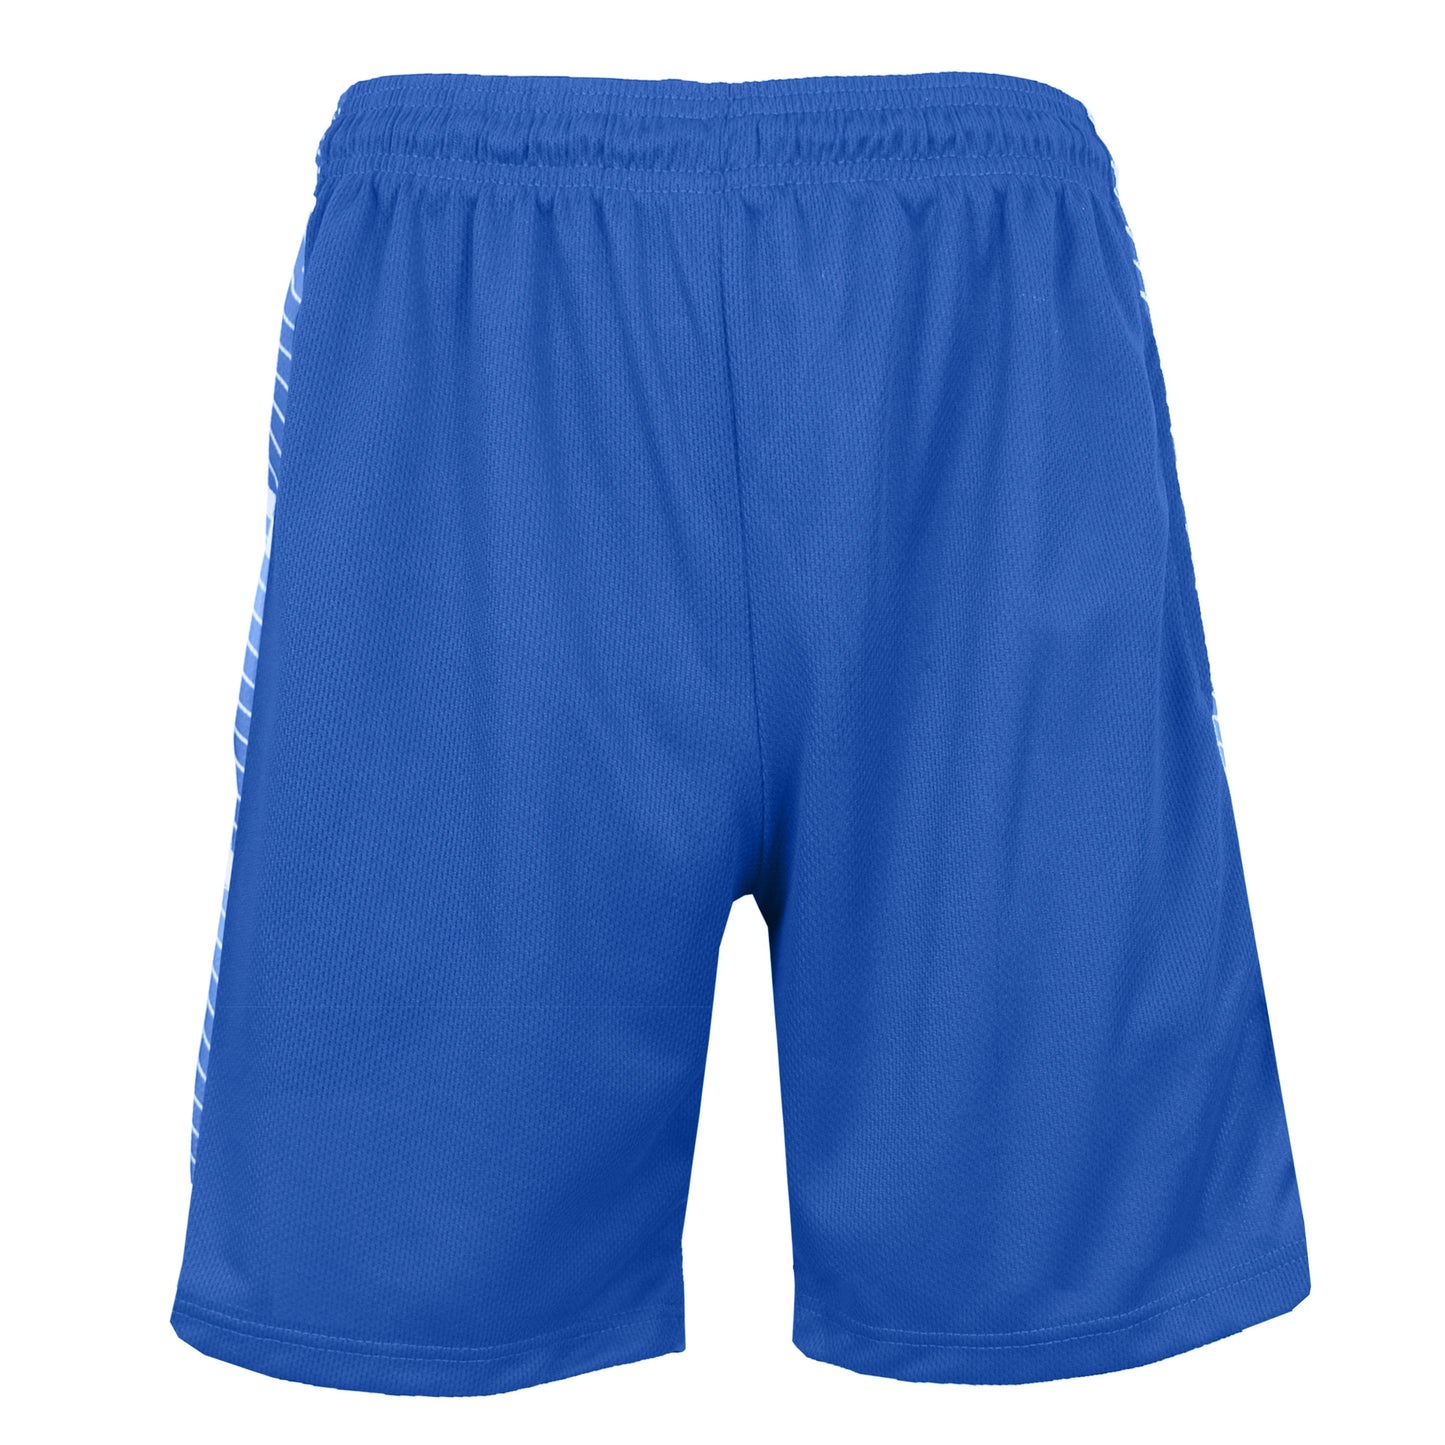 Men's Active Mesh Shorts With Side Trim Design - GalaxybyHarvic